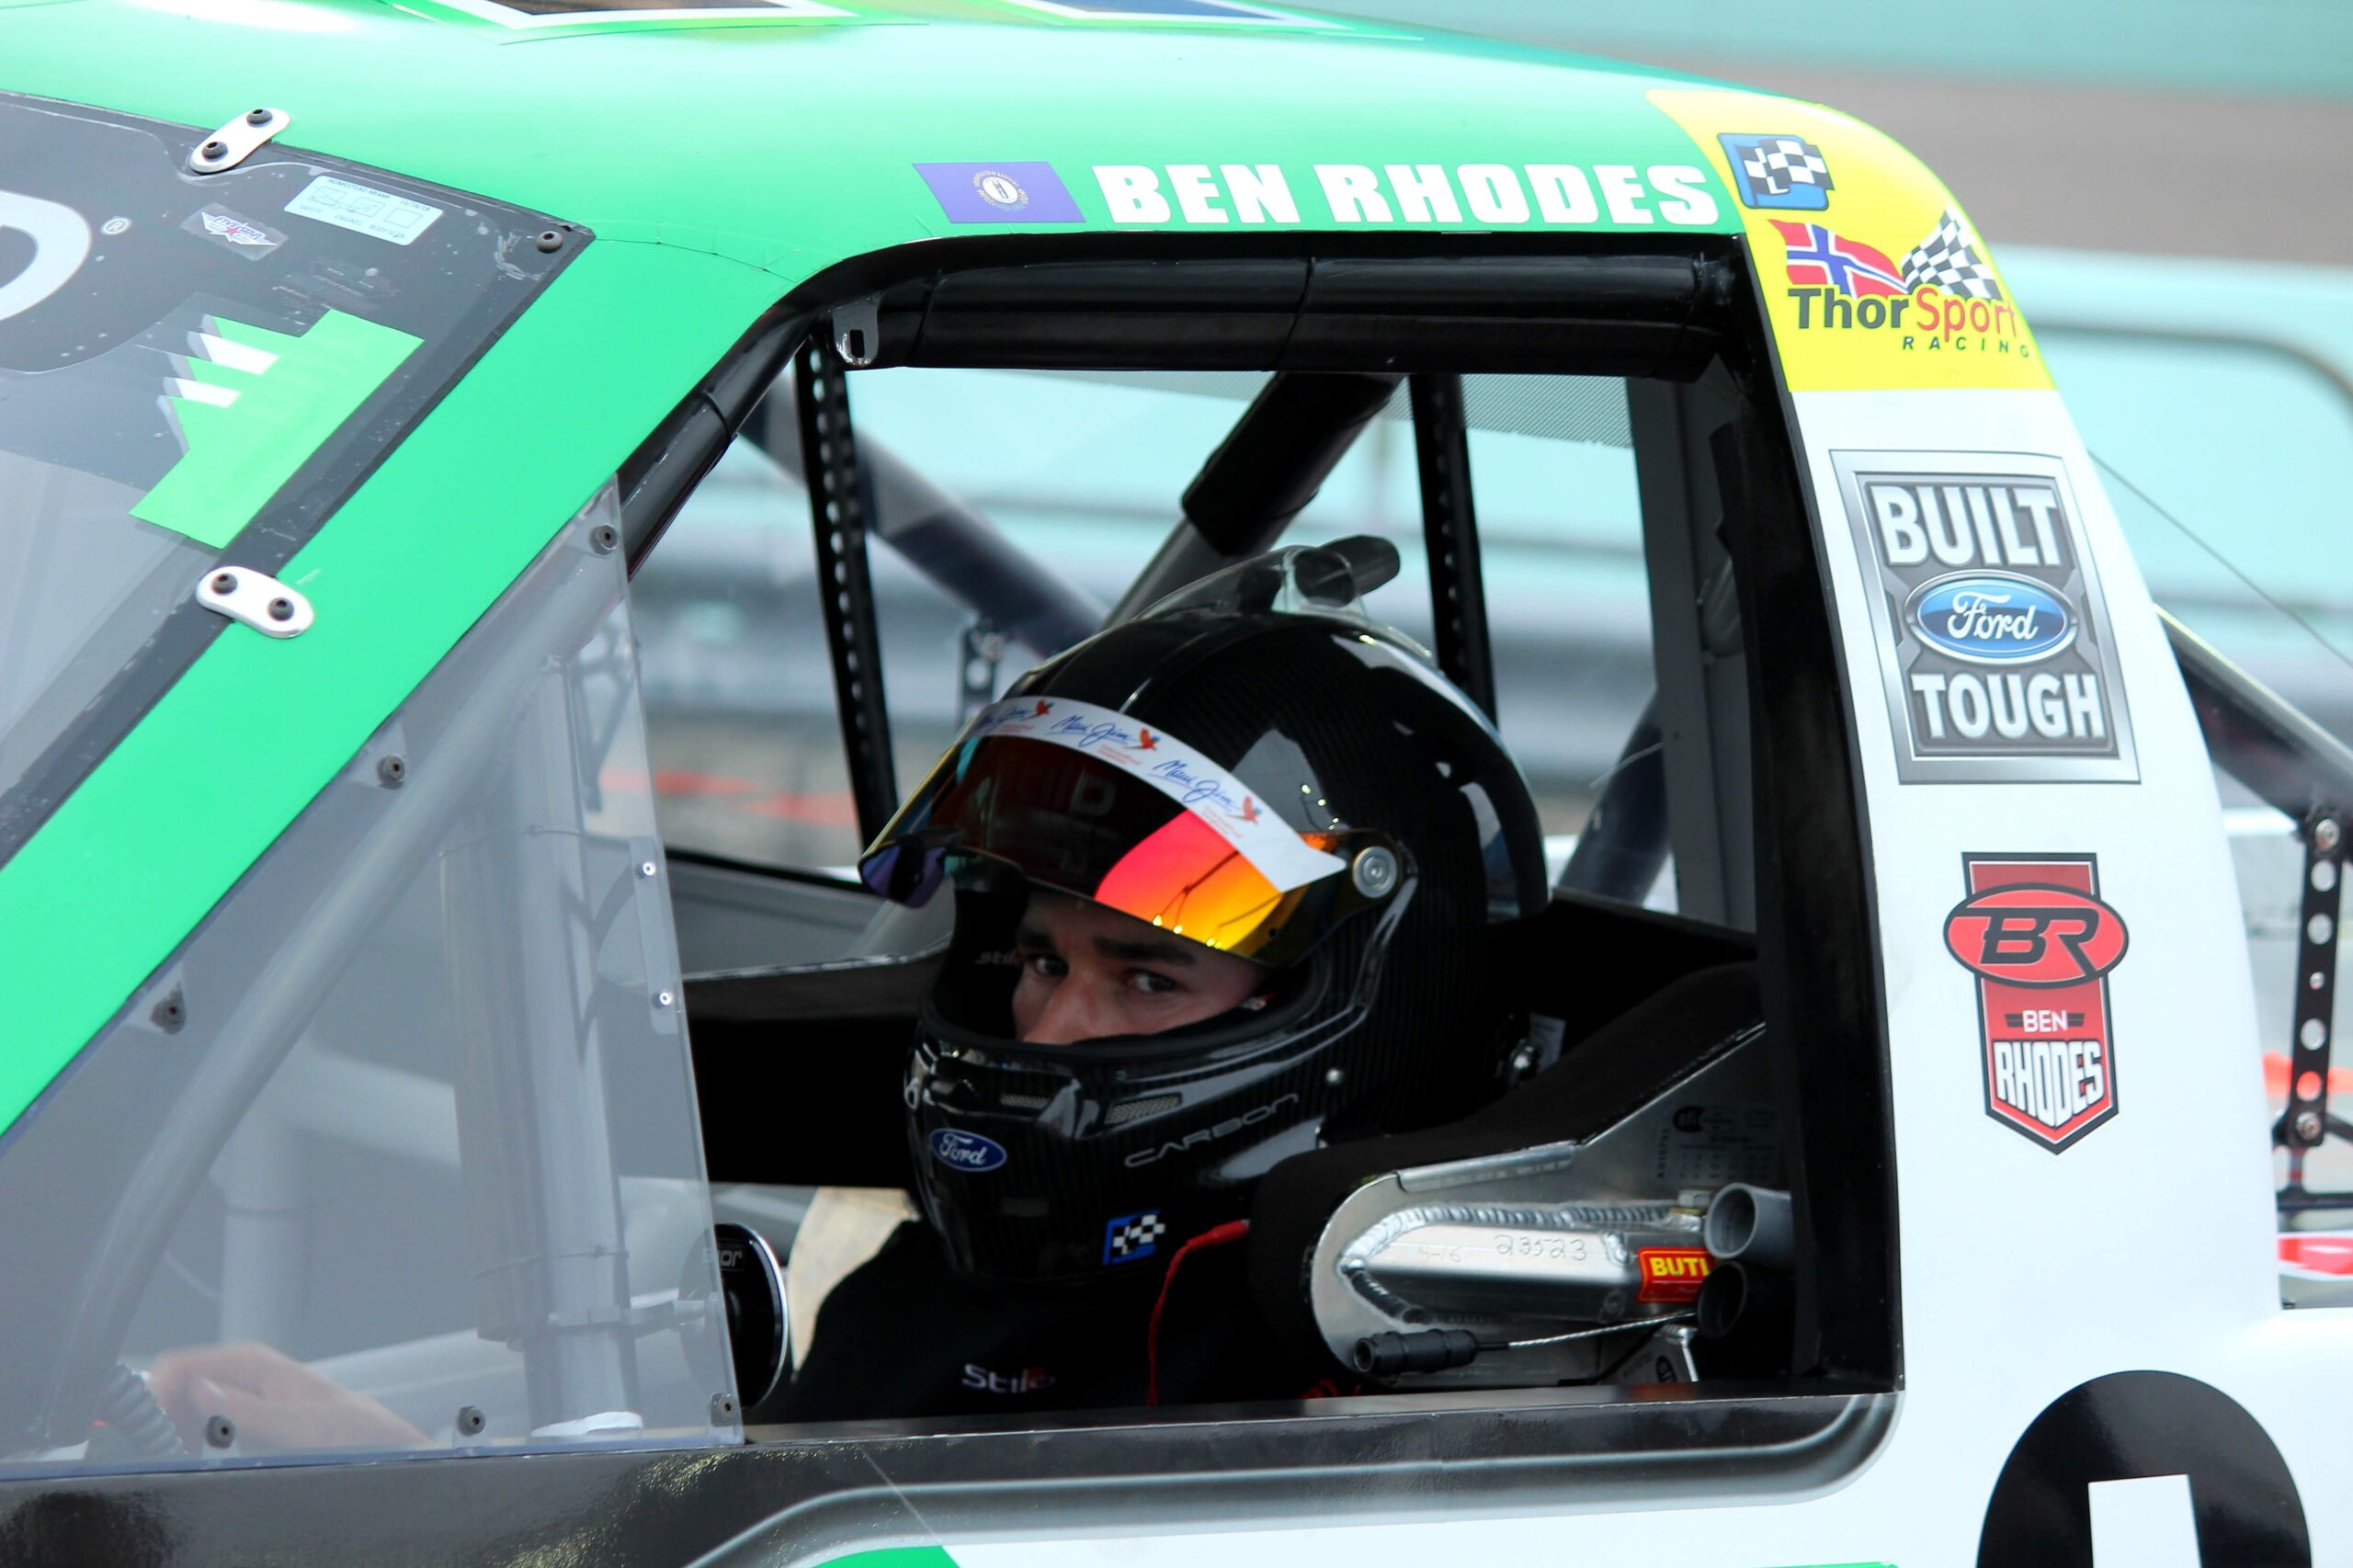 Ben Rhodes, driver of the No. 99 for Thorsport Racing, eyes his 100th start in the NASCAR Gander RV & Outdoors Truck Series. (Photo Credit: Josh Jones, Homestead 2018 / The Podium Finish.)